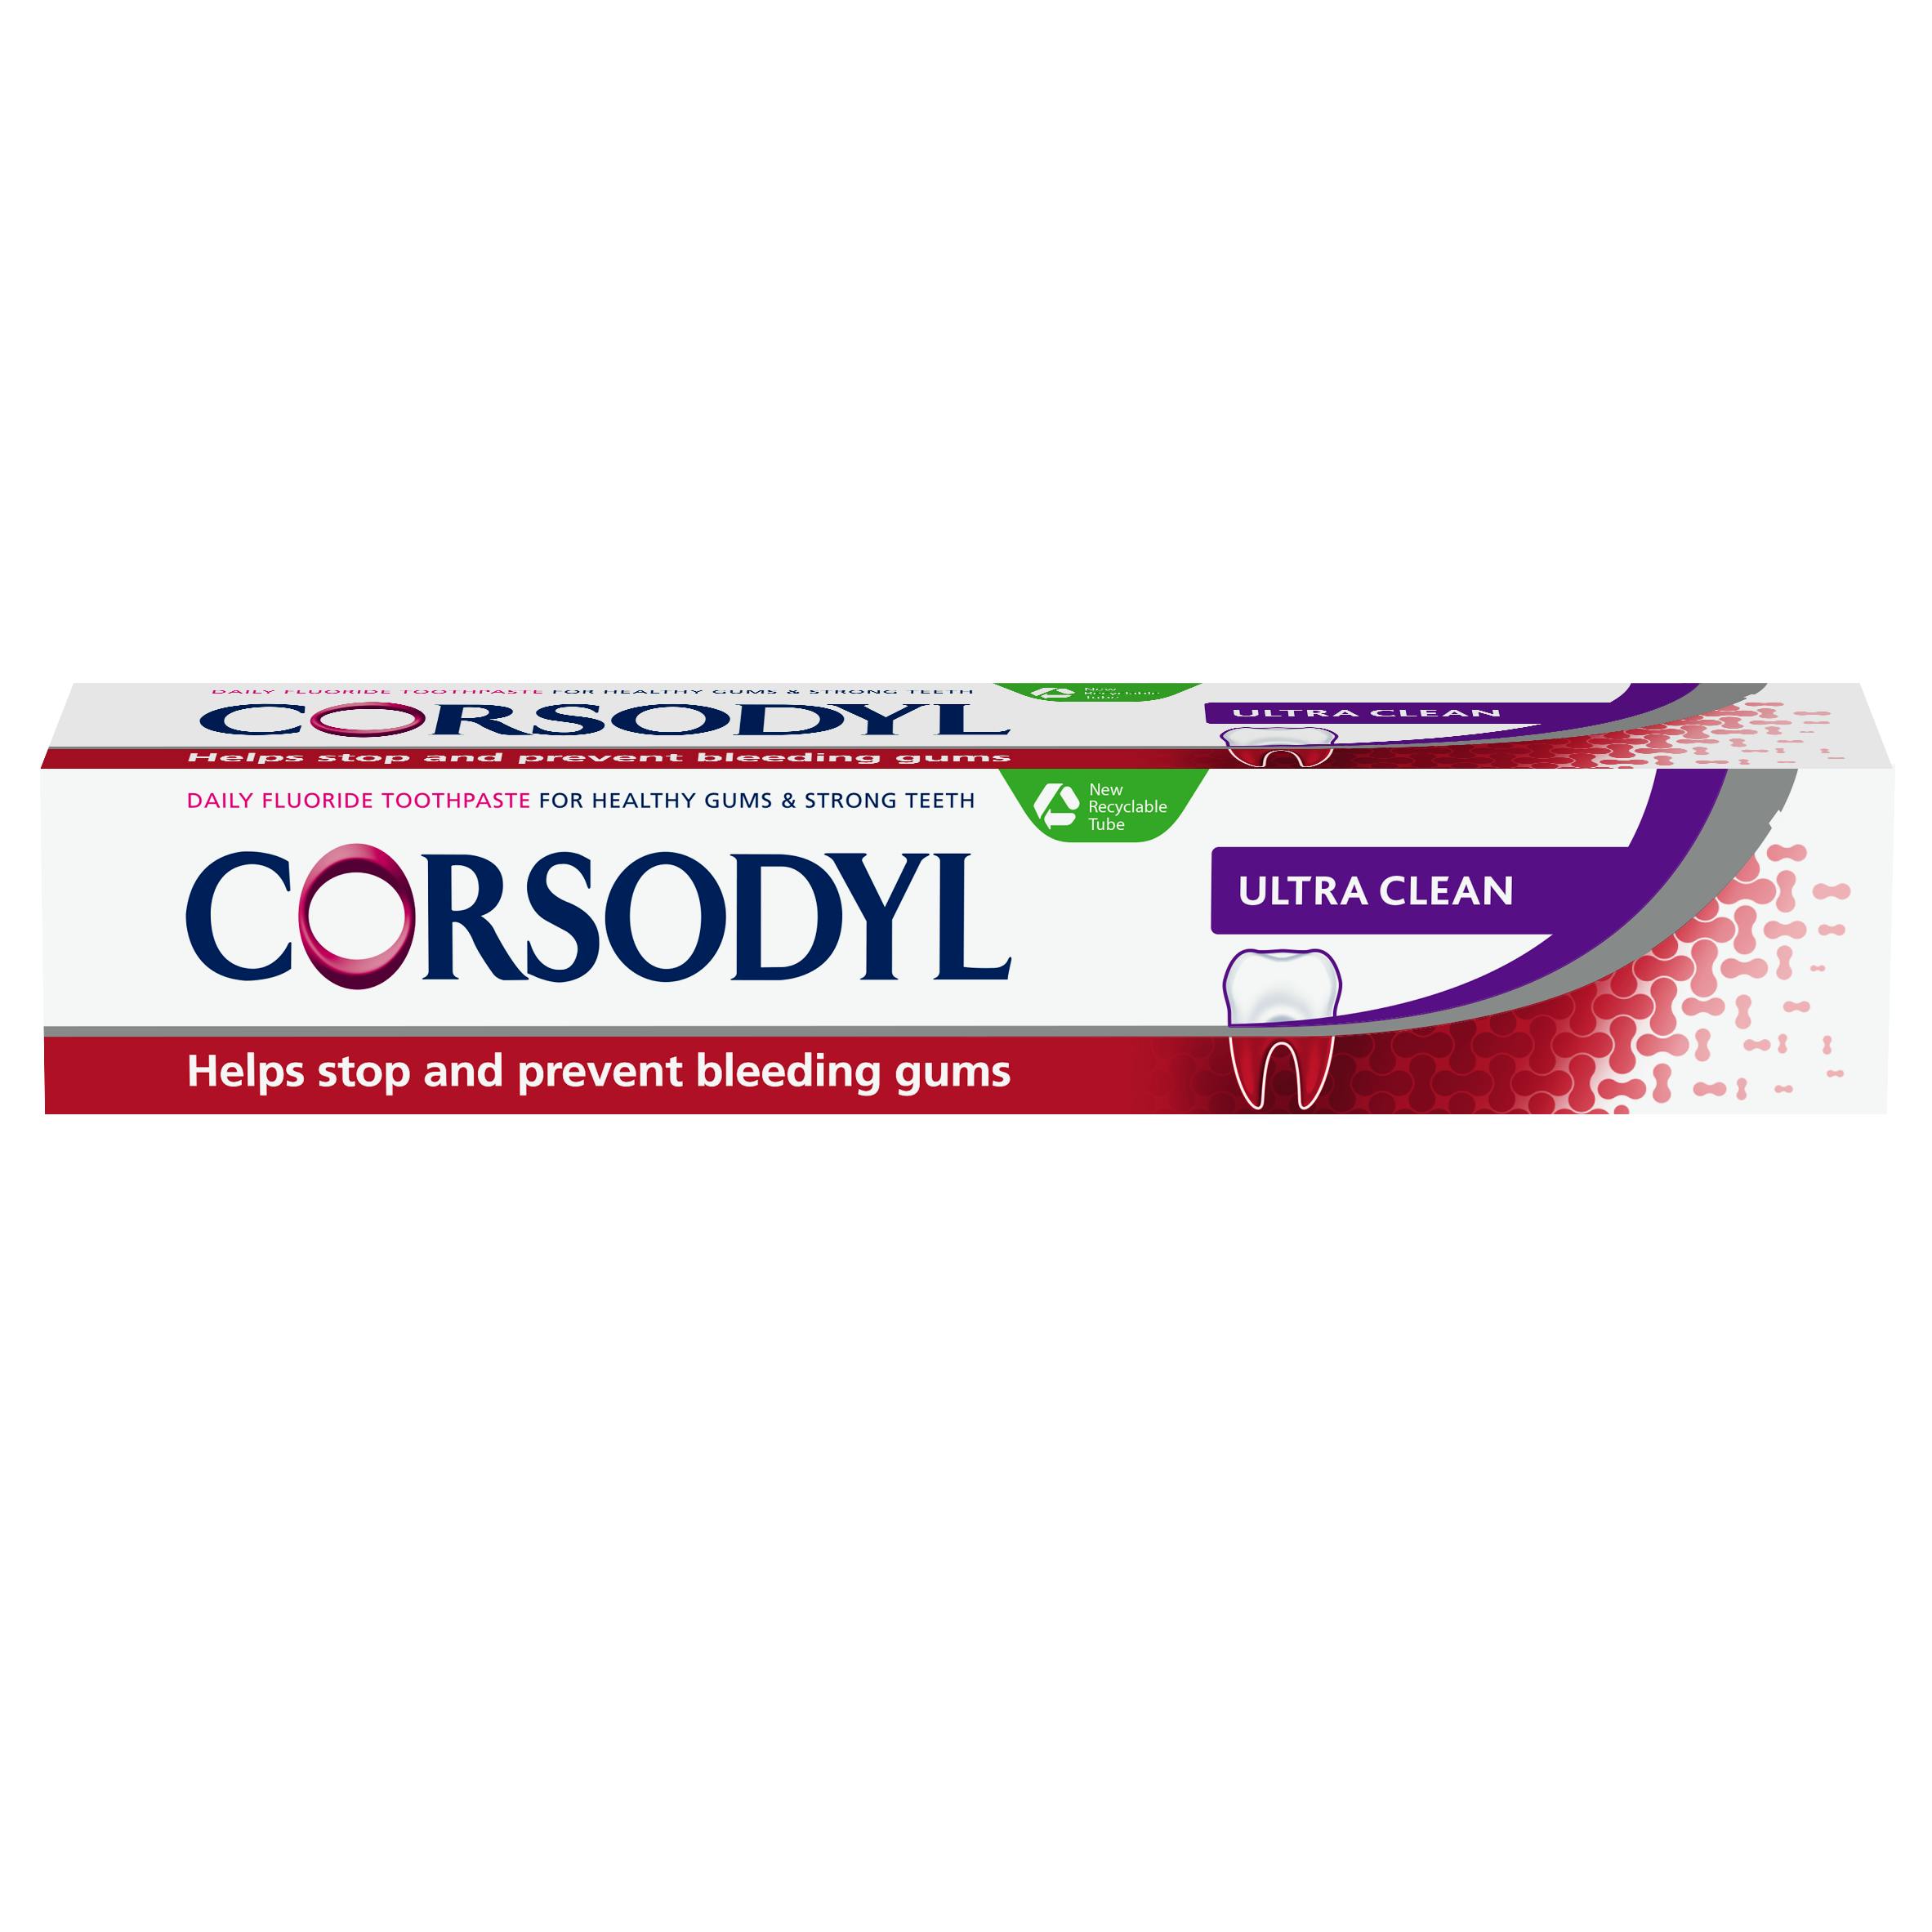 corsodyl ultra clean toothpaste